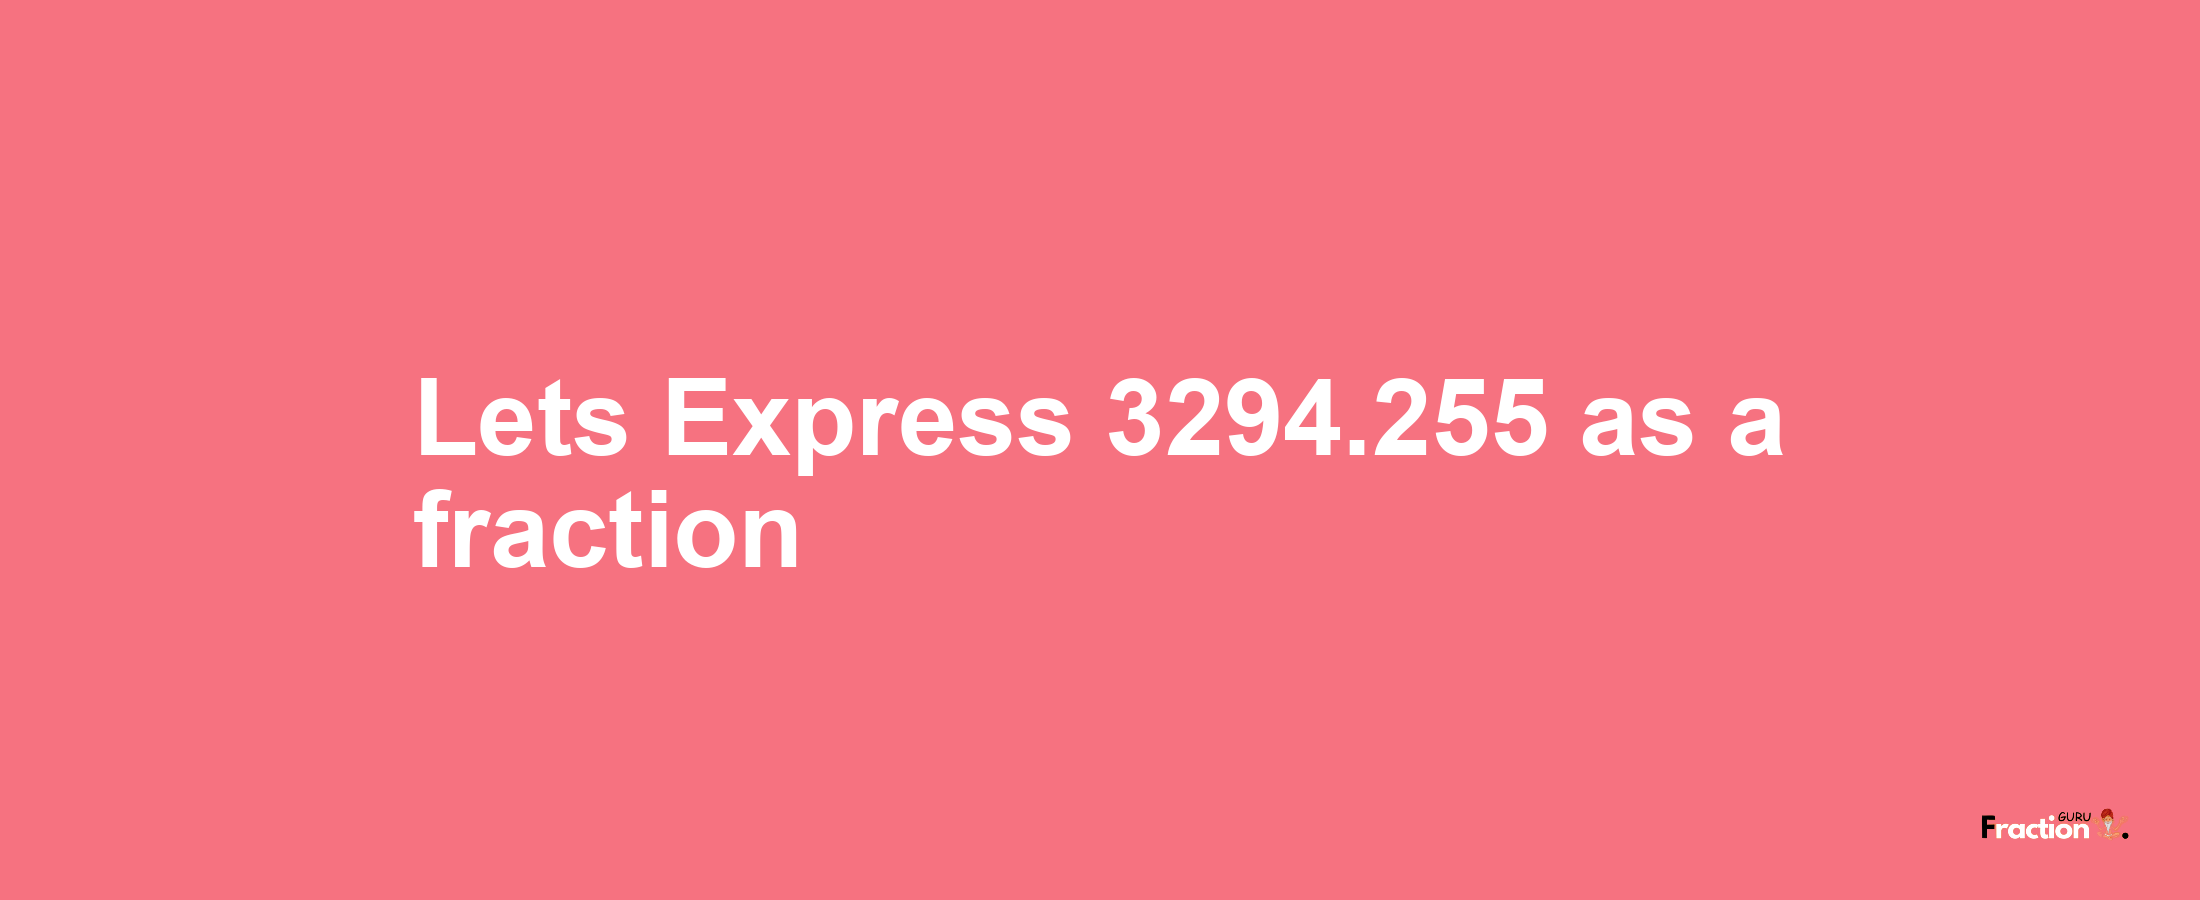 Lets Express 3294.255 as afraction